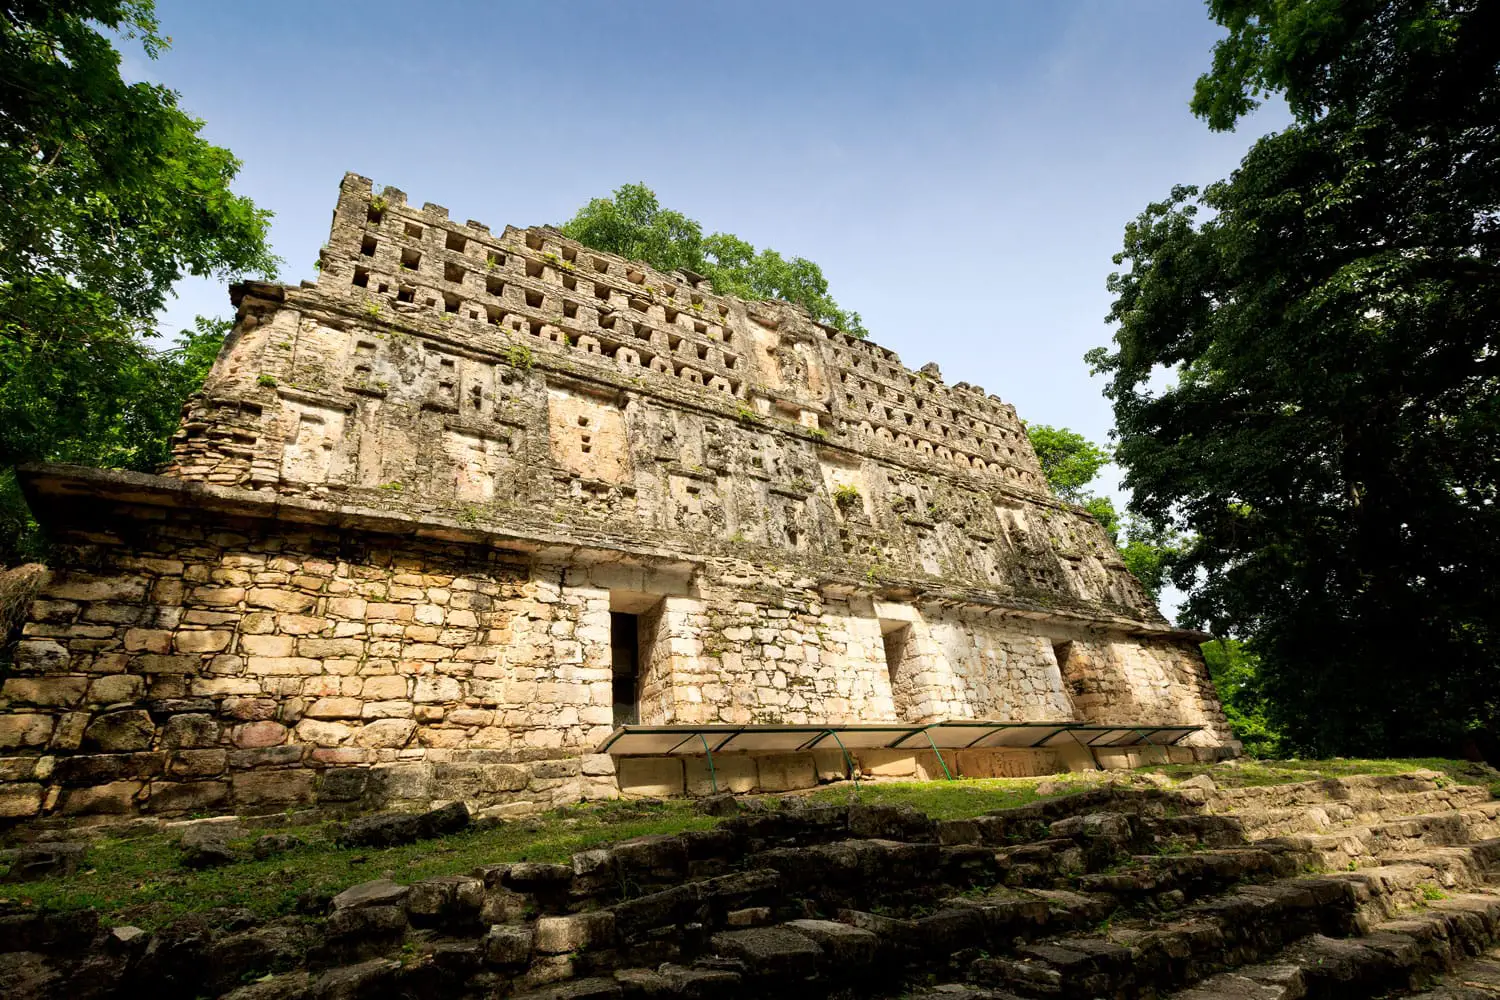 Top of a pyramid in Yaxchilan, Mexico